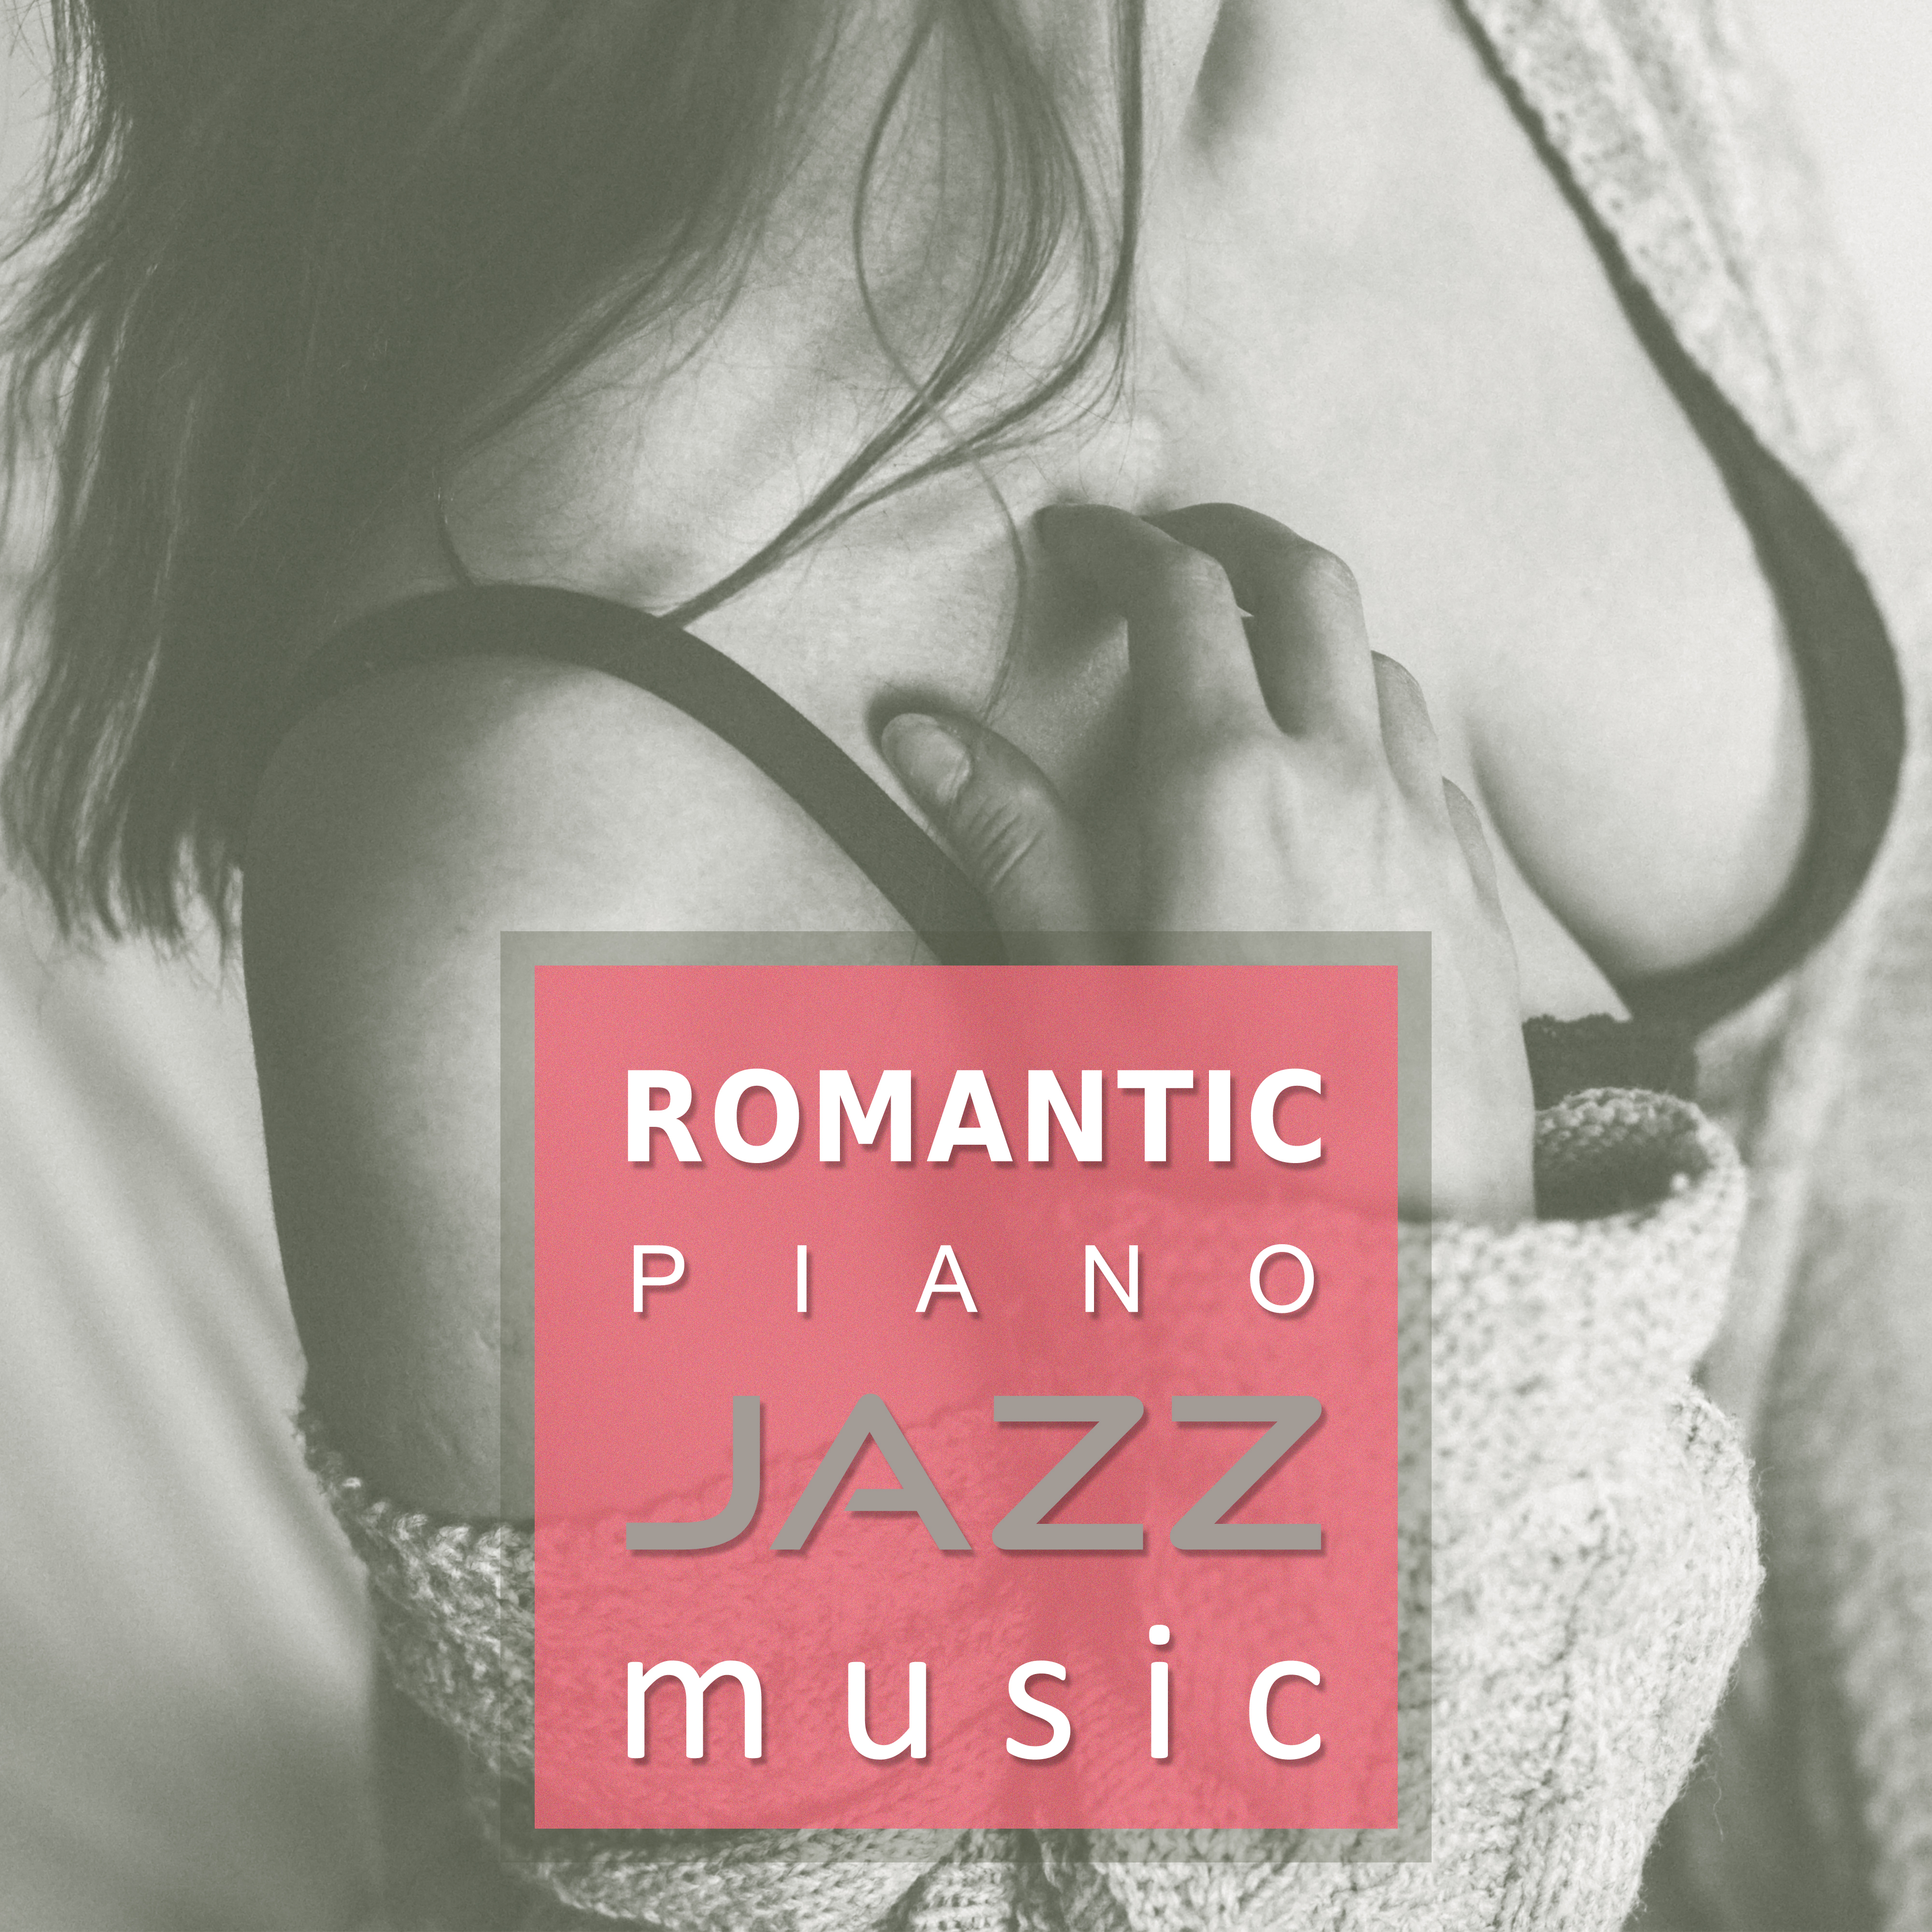 Romantic Piano Jazz Music – Beautiful Moments with Jazz, Best Romantic Music, Calming Sounds of Jazz